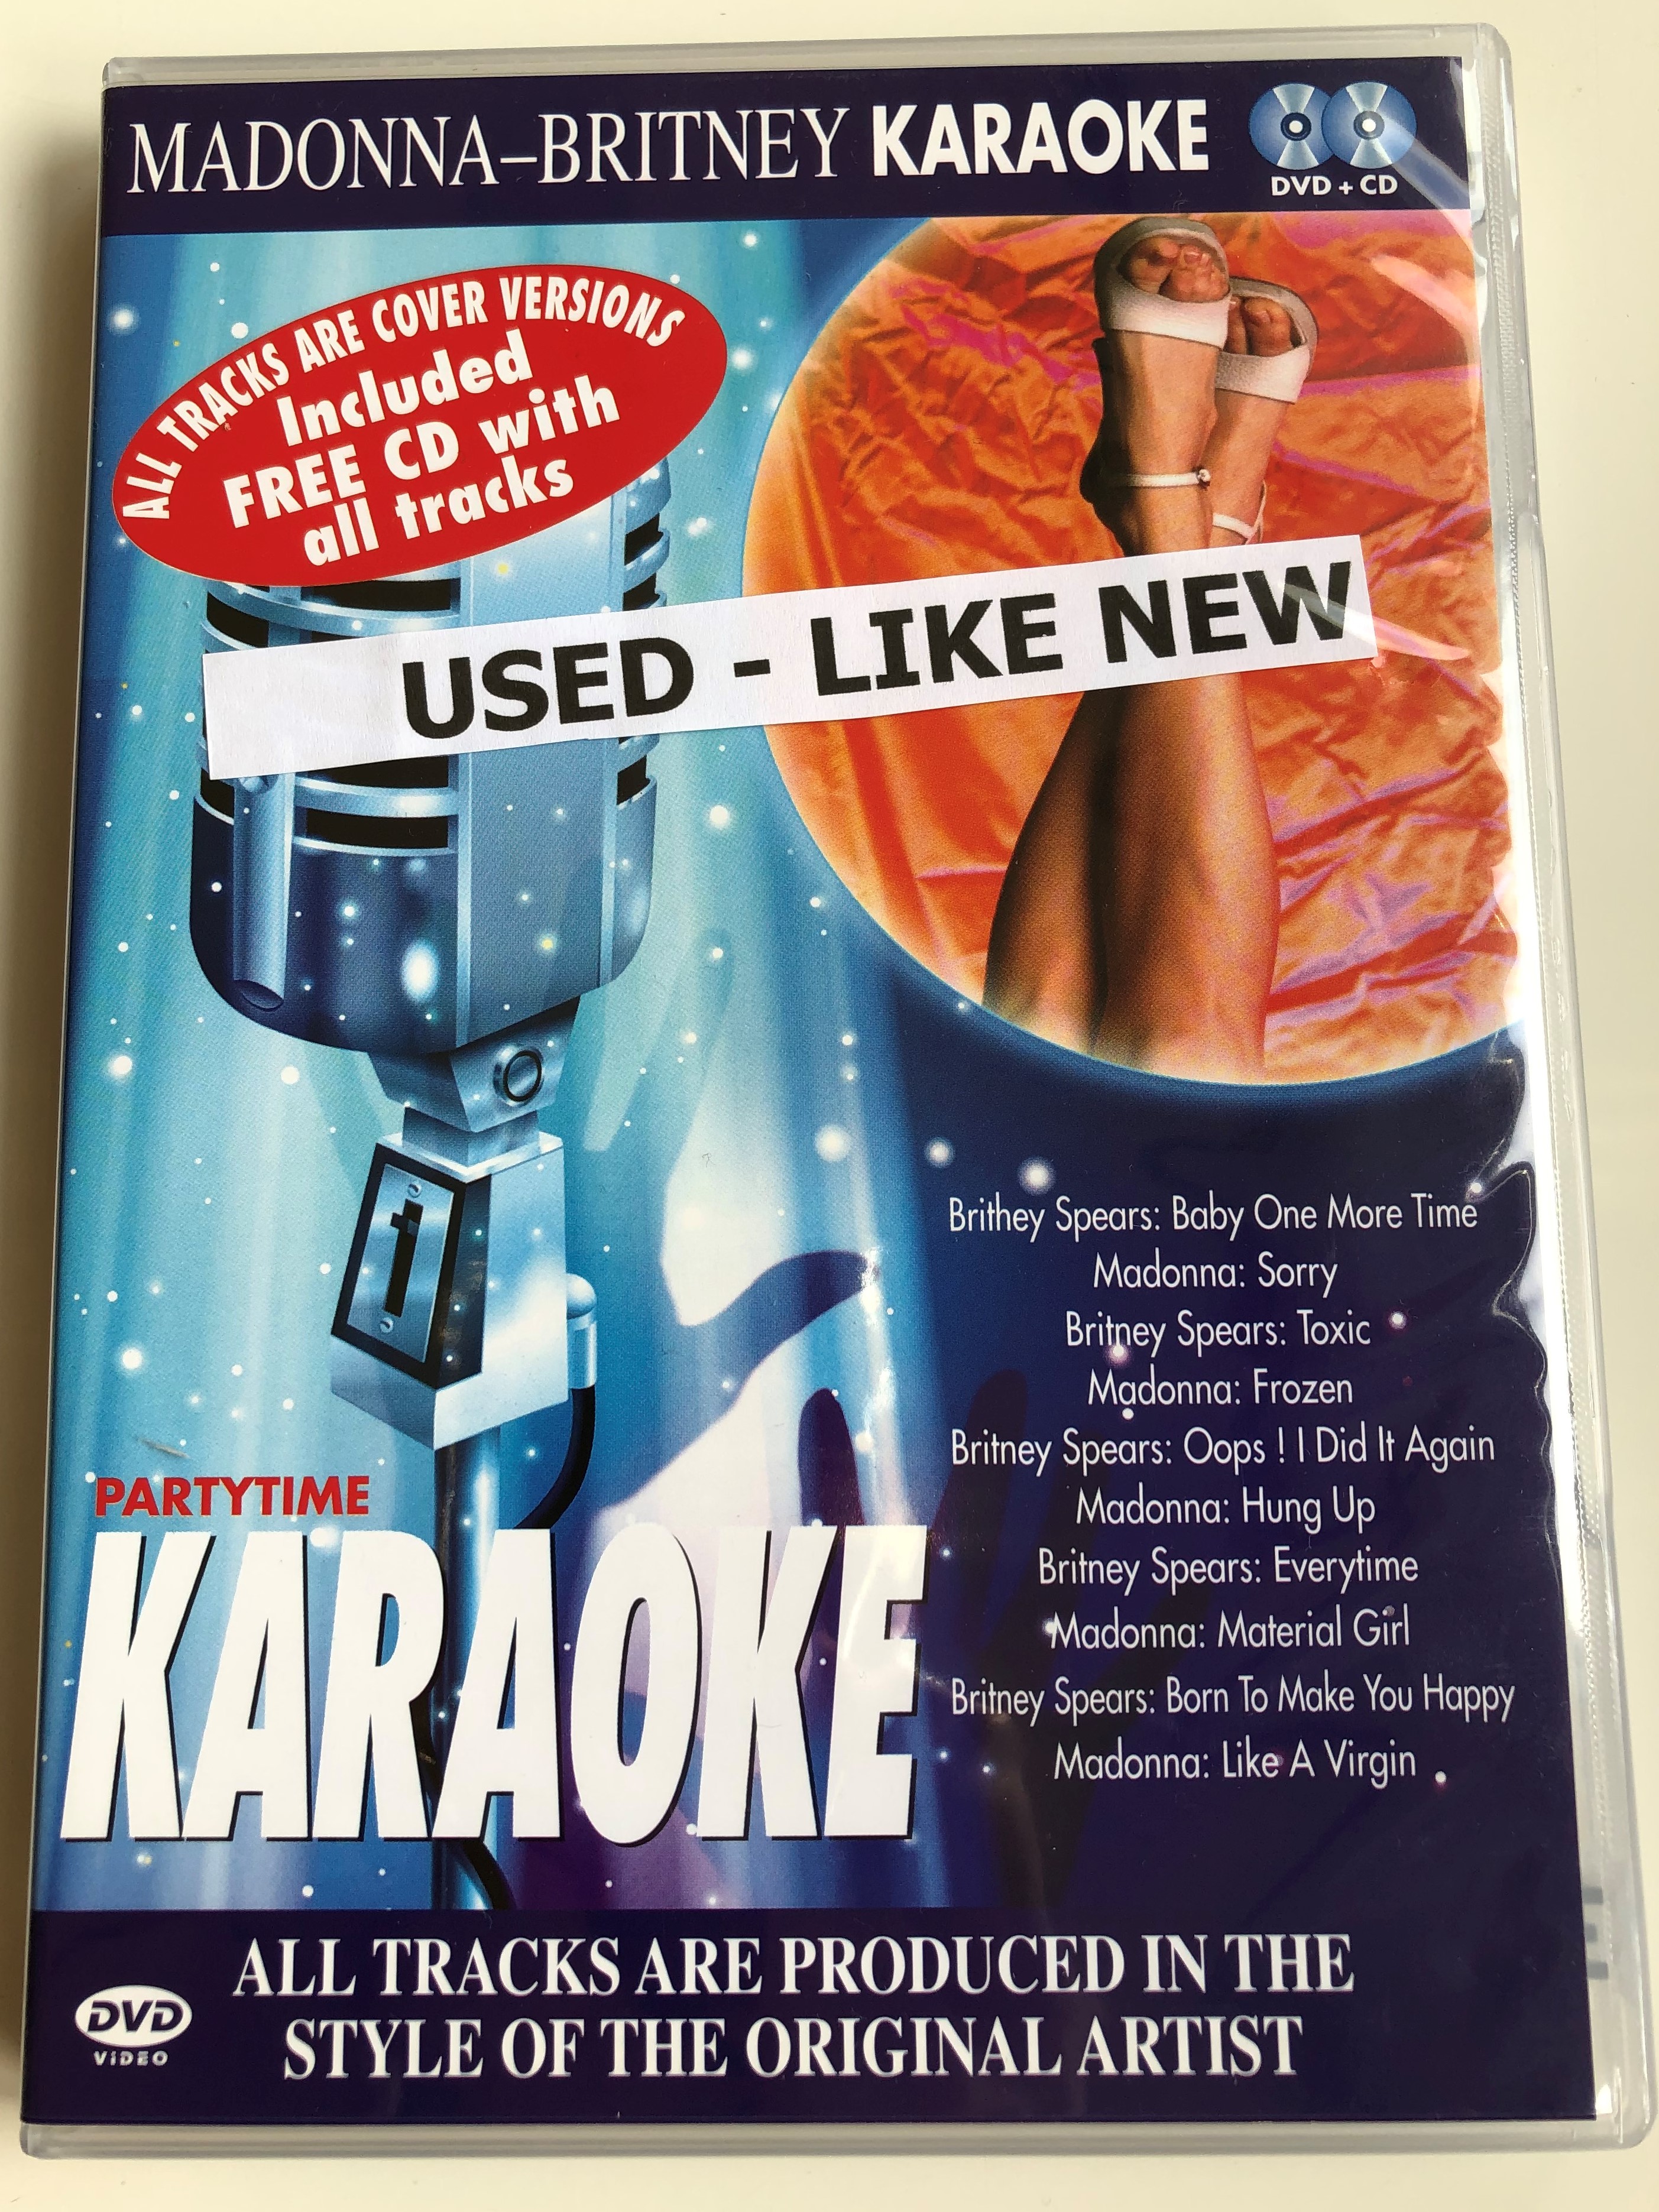 Partytime Karaoke DVD + CD 2006 Madonna-Britney / Absolute Karaoke Vol. 2 /  Cover versions, produced in the style of the original artists / Star Media  group - bibleinmylanguage